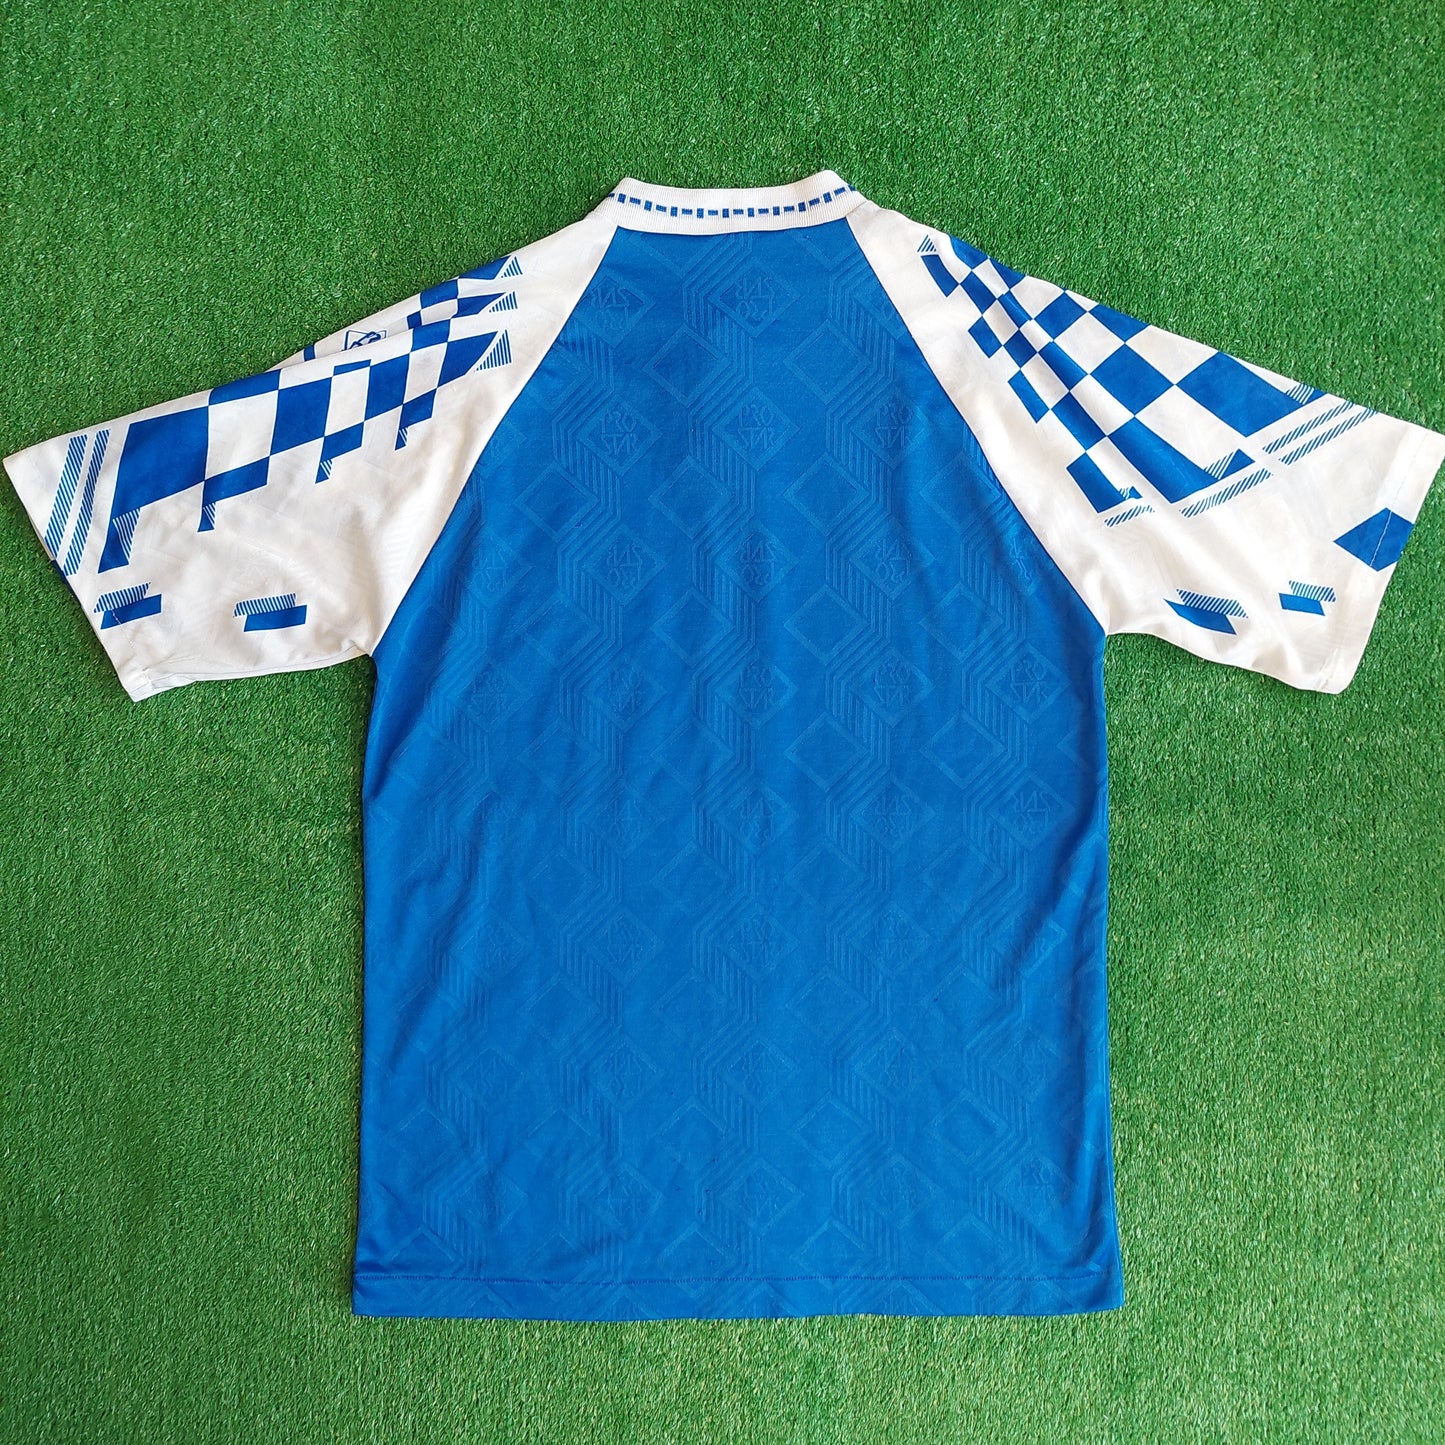 Dungannon Swifts Vintage 80's Home Shirt (Very Good) - Size L (38/40)